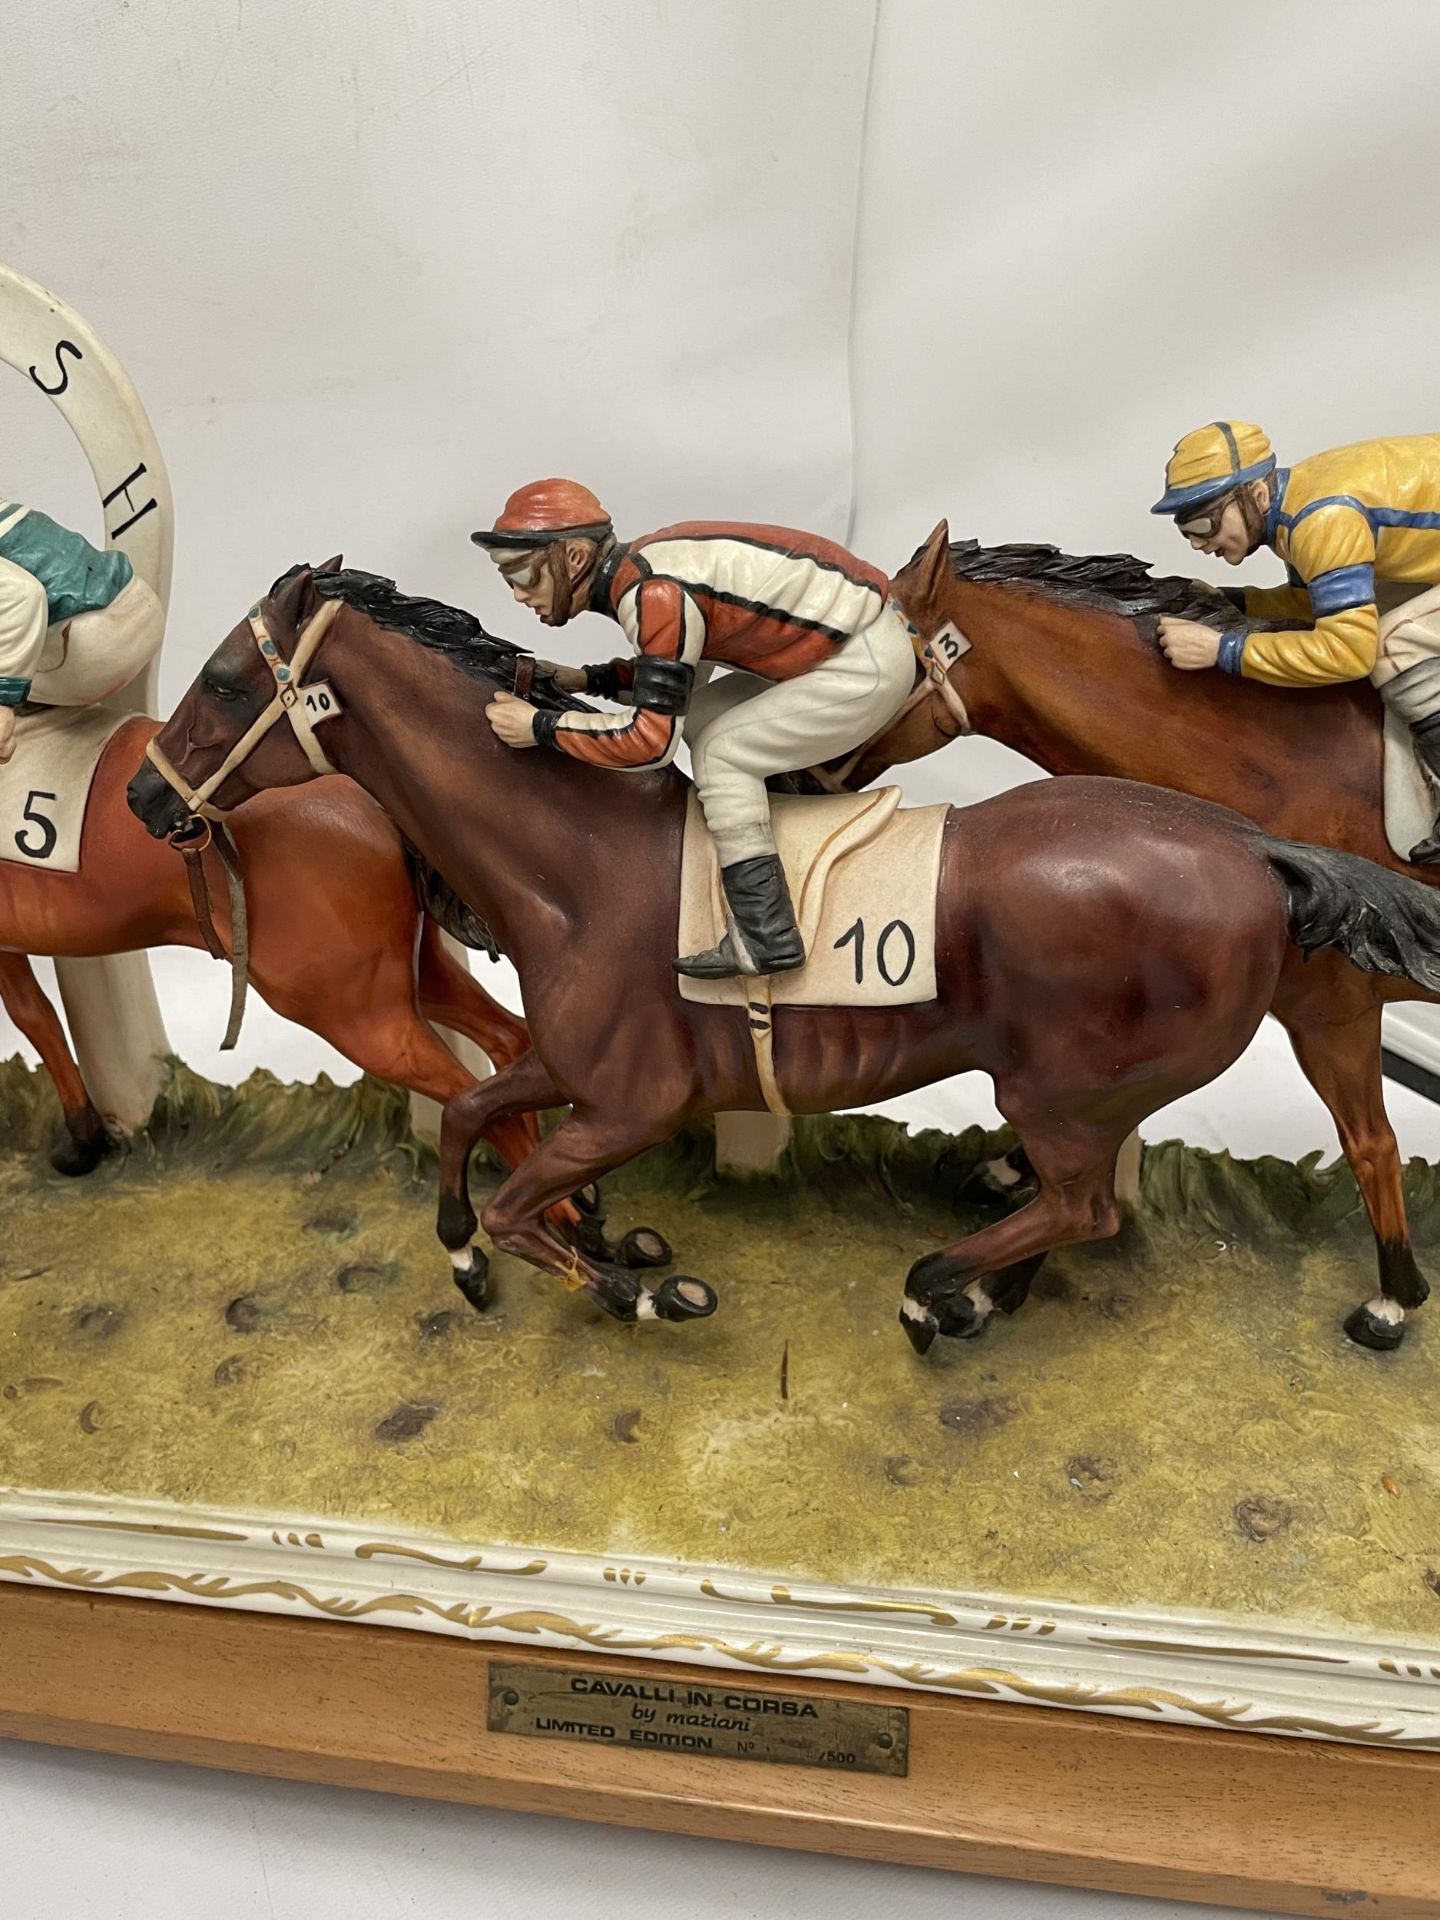 A LARGE LIMITED EDITION CAPODIMONTE CAVALLI IN CORSA HORSE RACING TABLEAU FIGURE BY MAZIANI, - Image 3 of 7